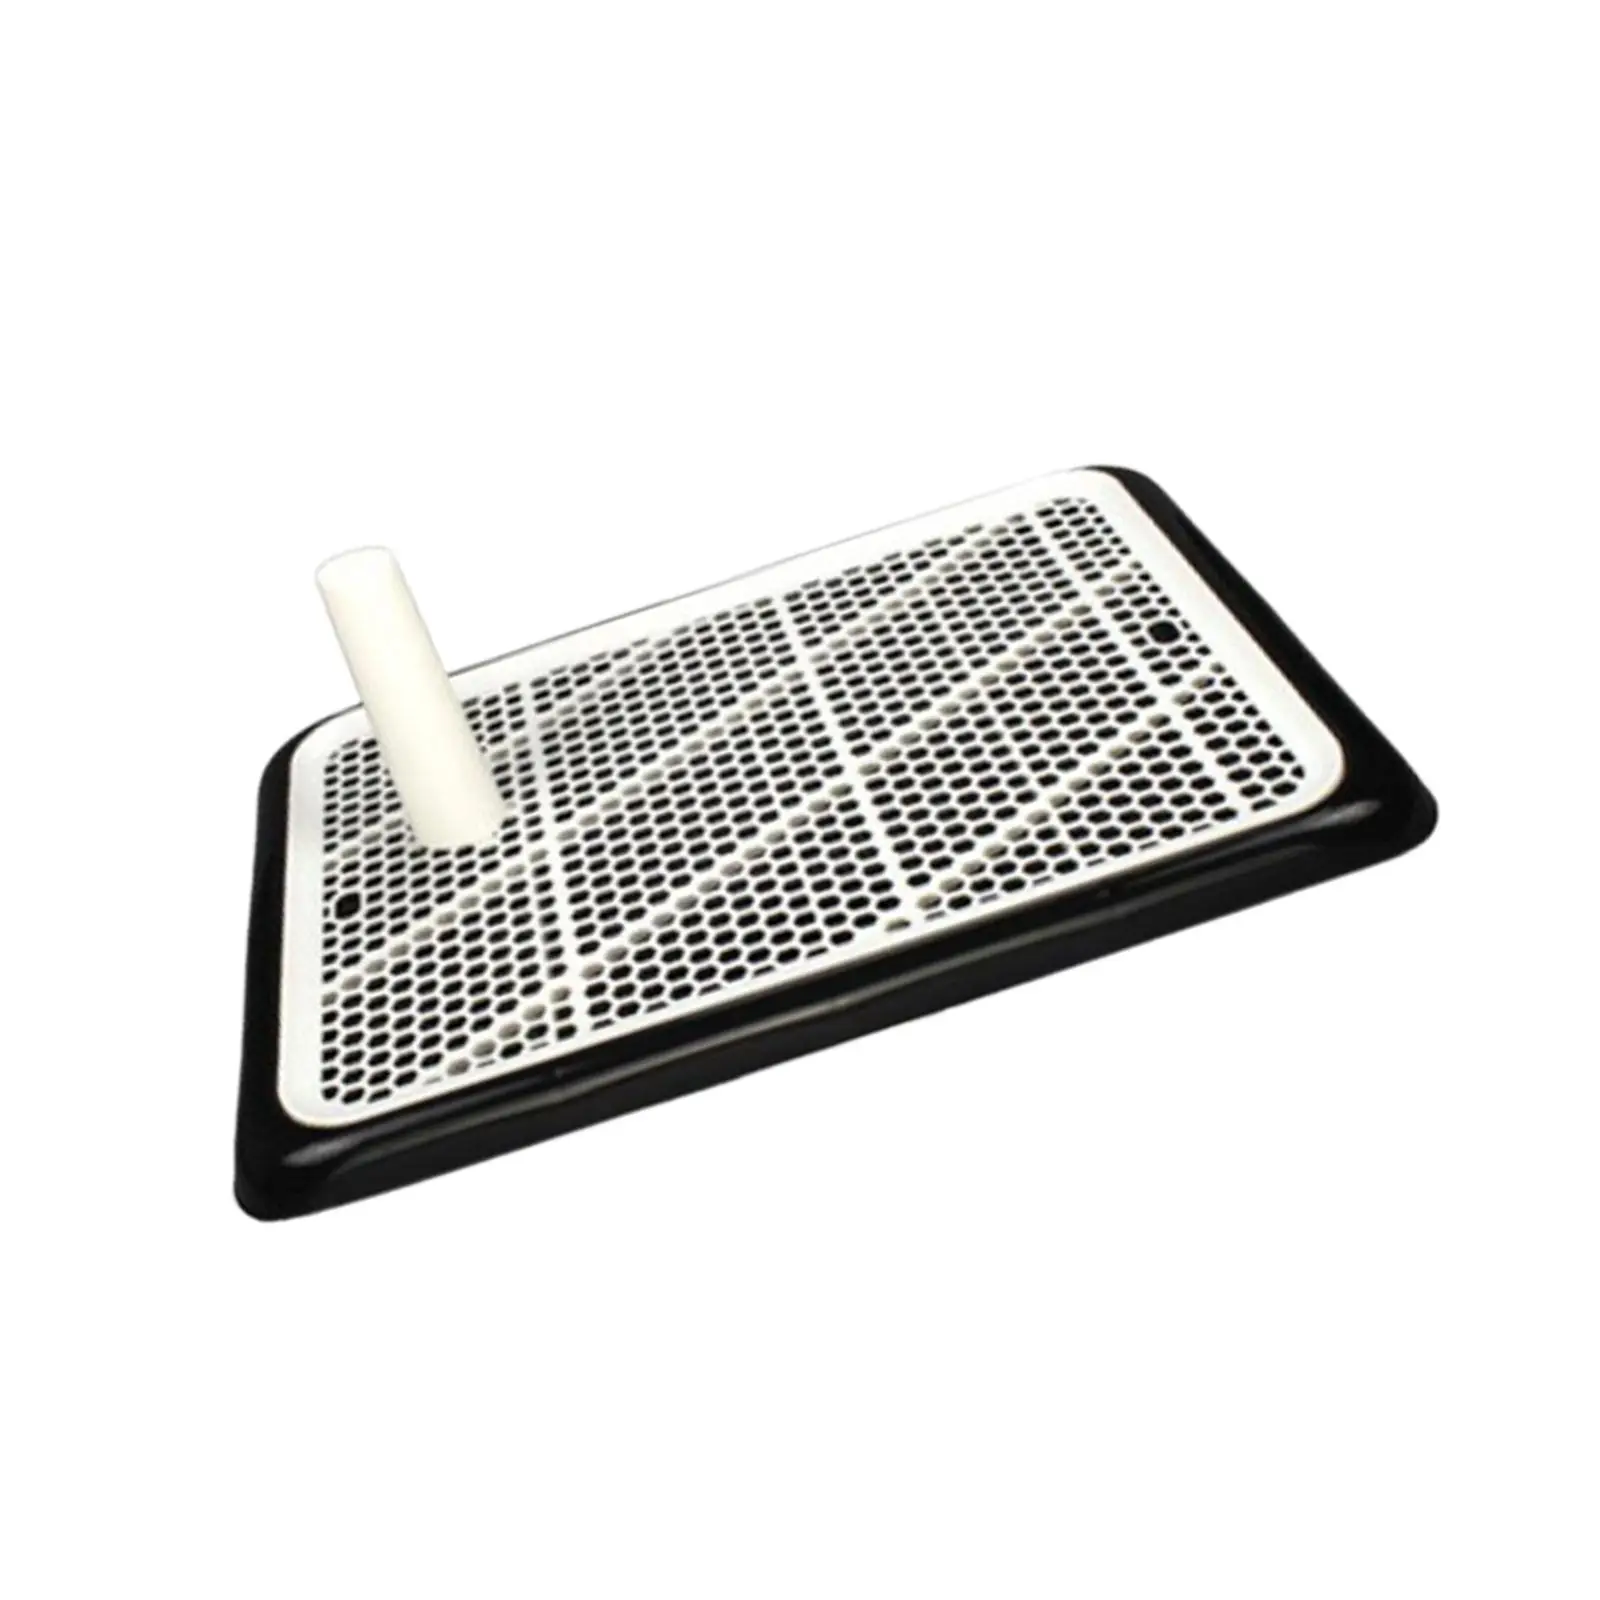 Puppy Training Toilet Portable Floor Protection Grid Separated Groove Design Mesh Training Pad Holder for Pet Supplies Indoor